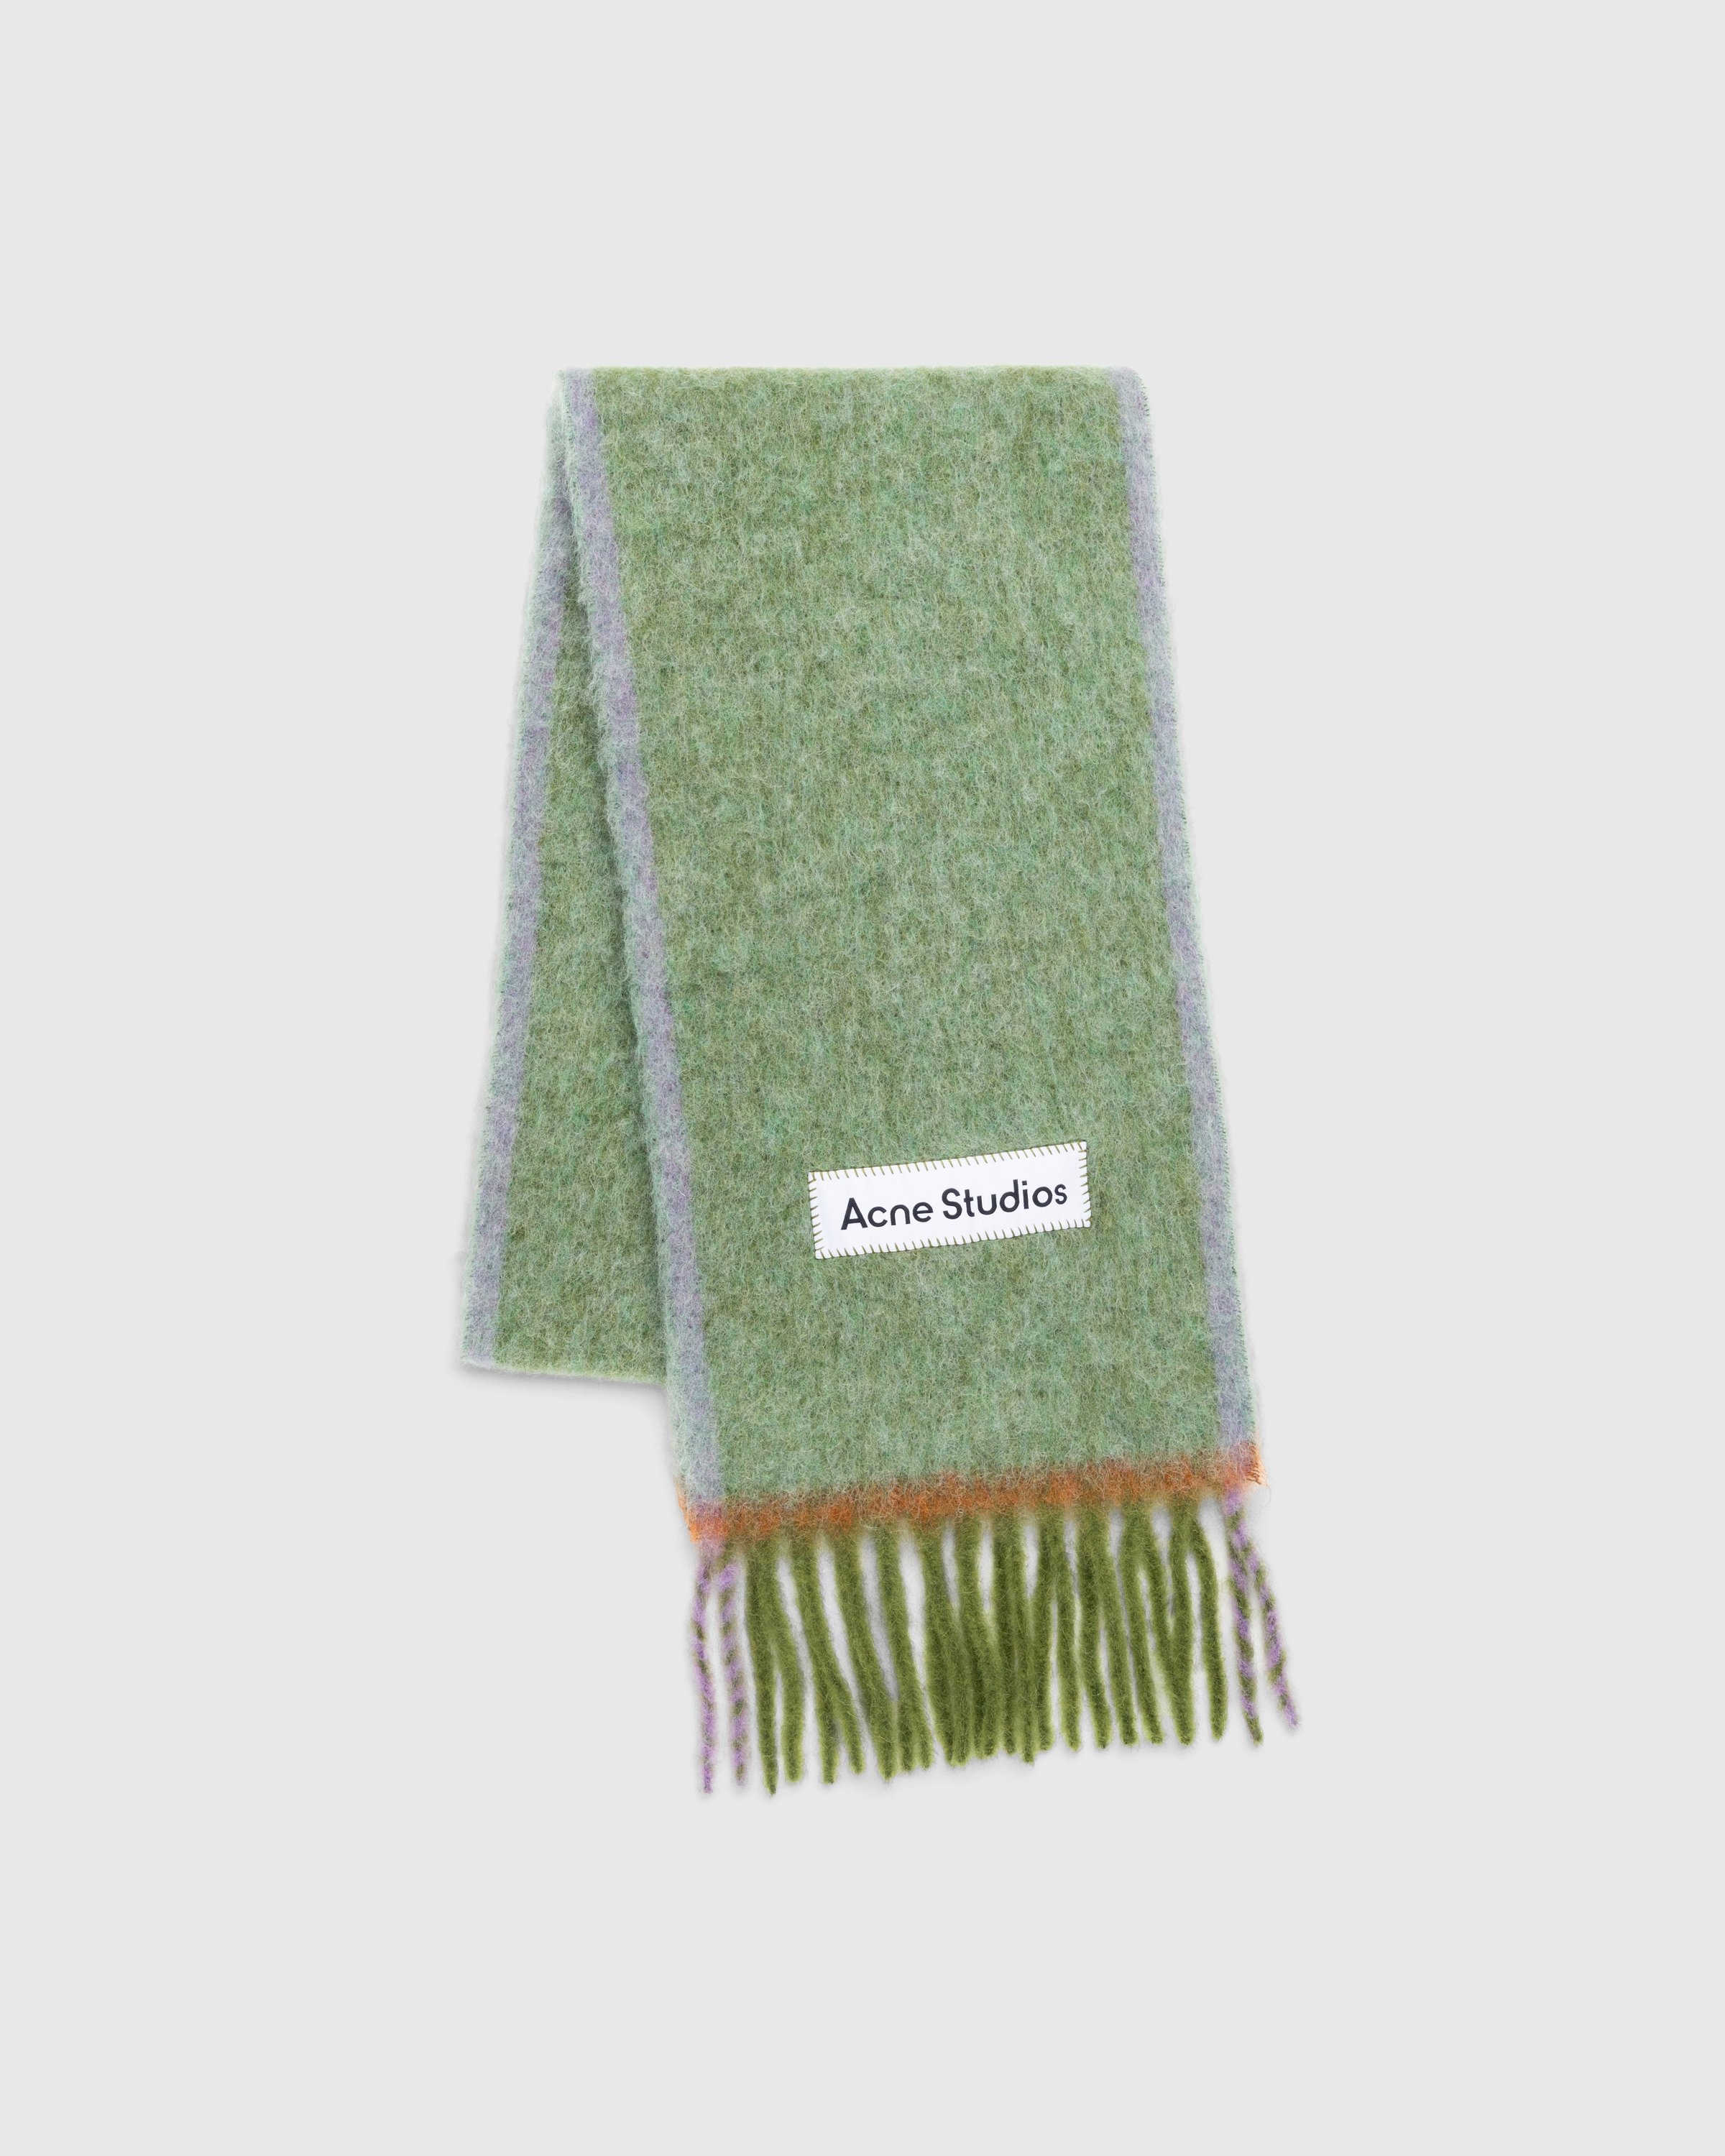 Acne Studios - Wool Mohair Scarf Grass Green - Accessories - Green - Image 2